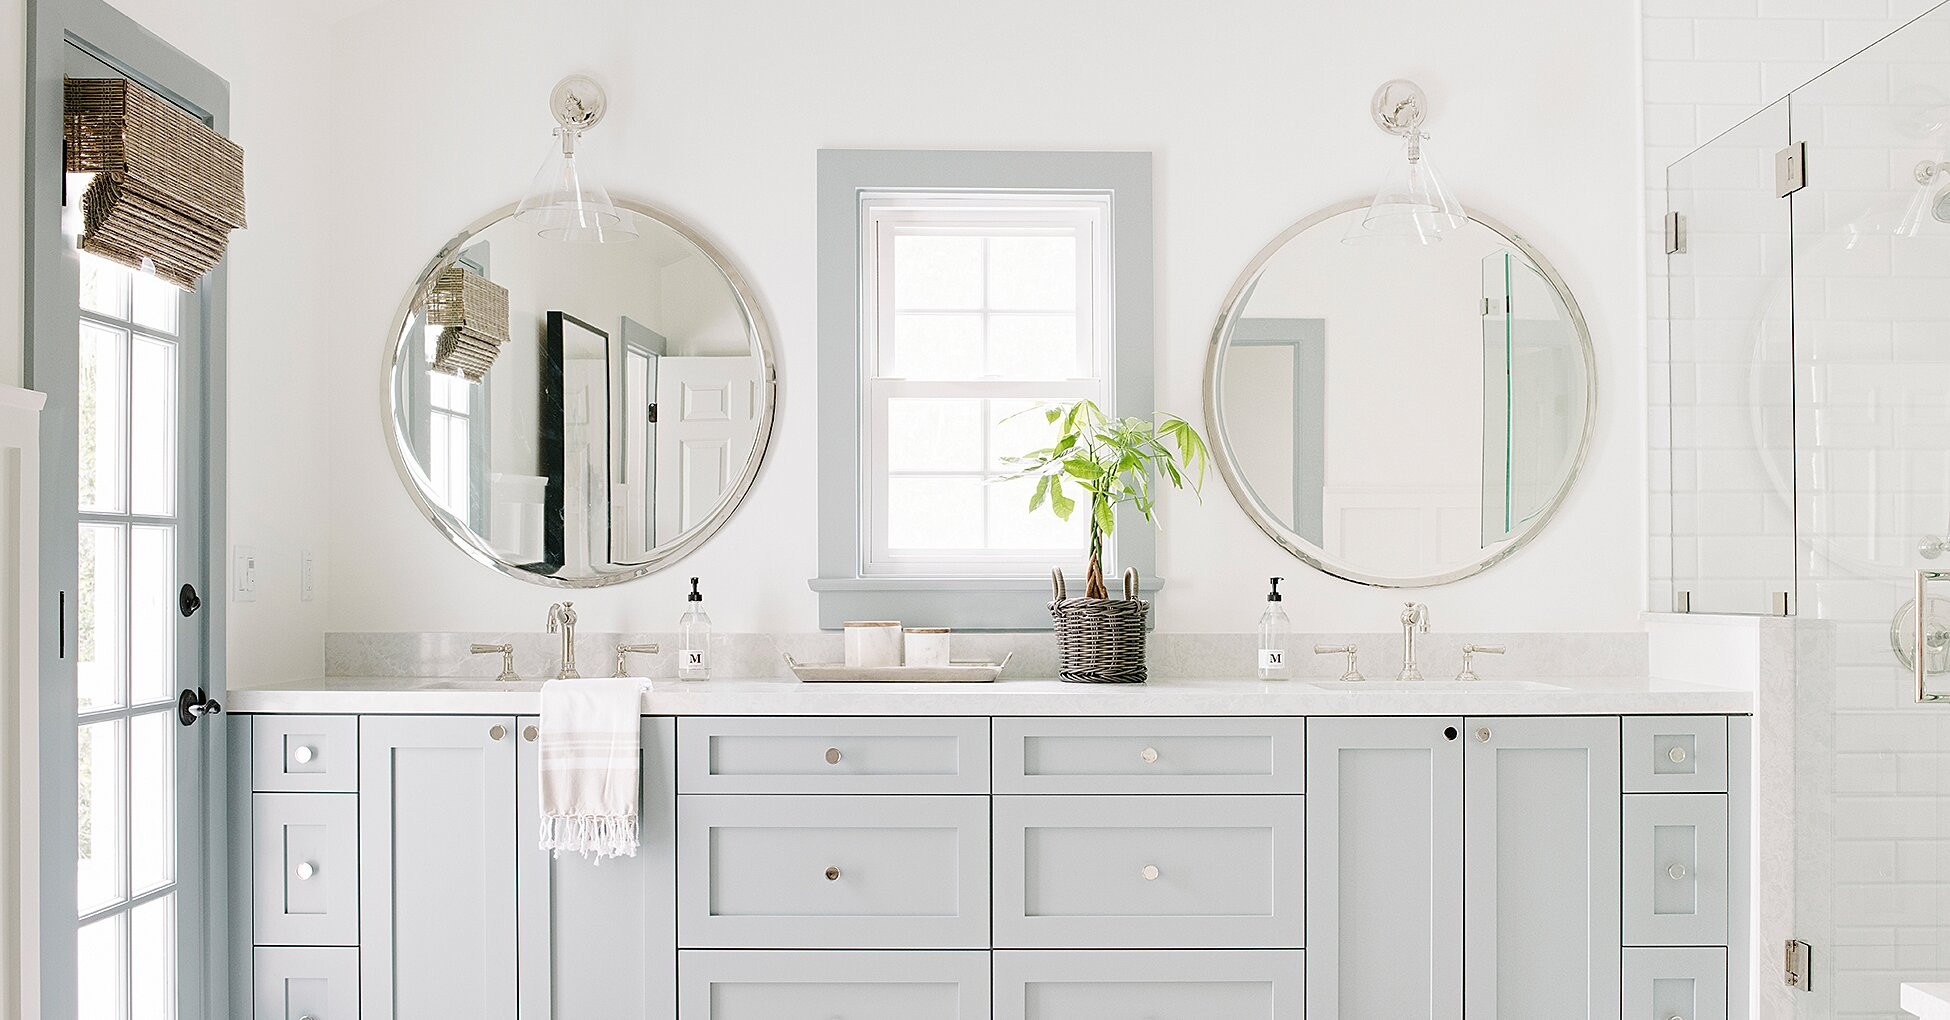 2020 Bathroom Colors
 These Are the Most Popular Bathroom Paint Colors for 2020